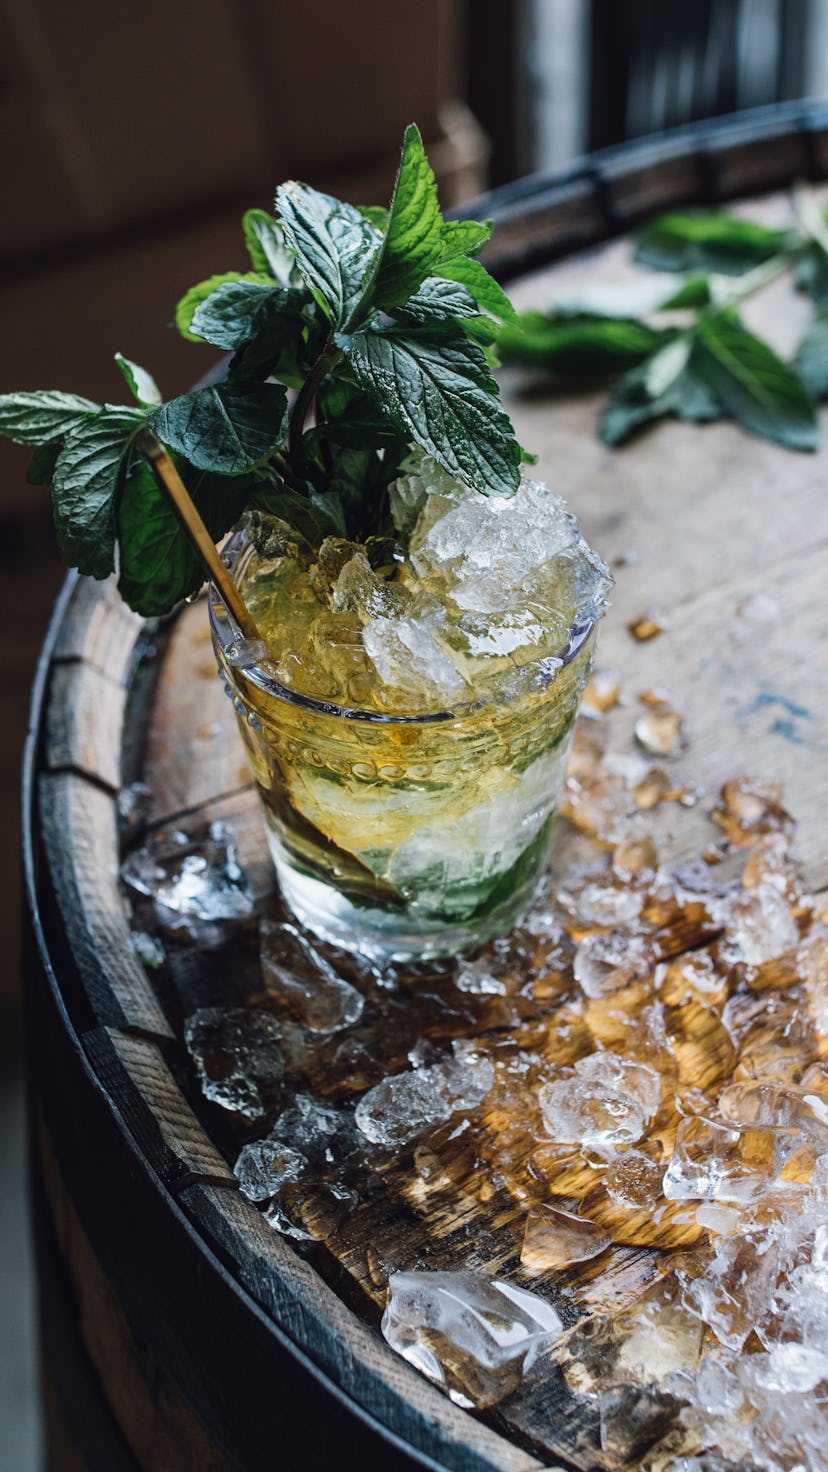 Mint Julep cocktail in glass on Bourbon whiskey barrel with crushed ice 